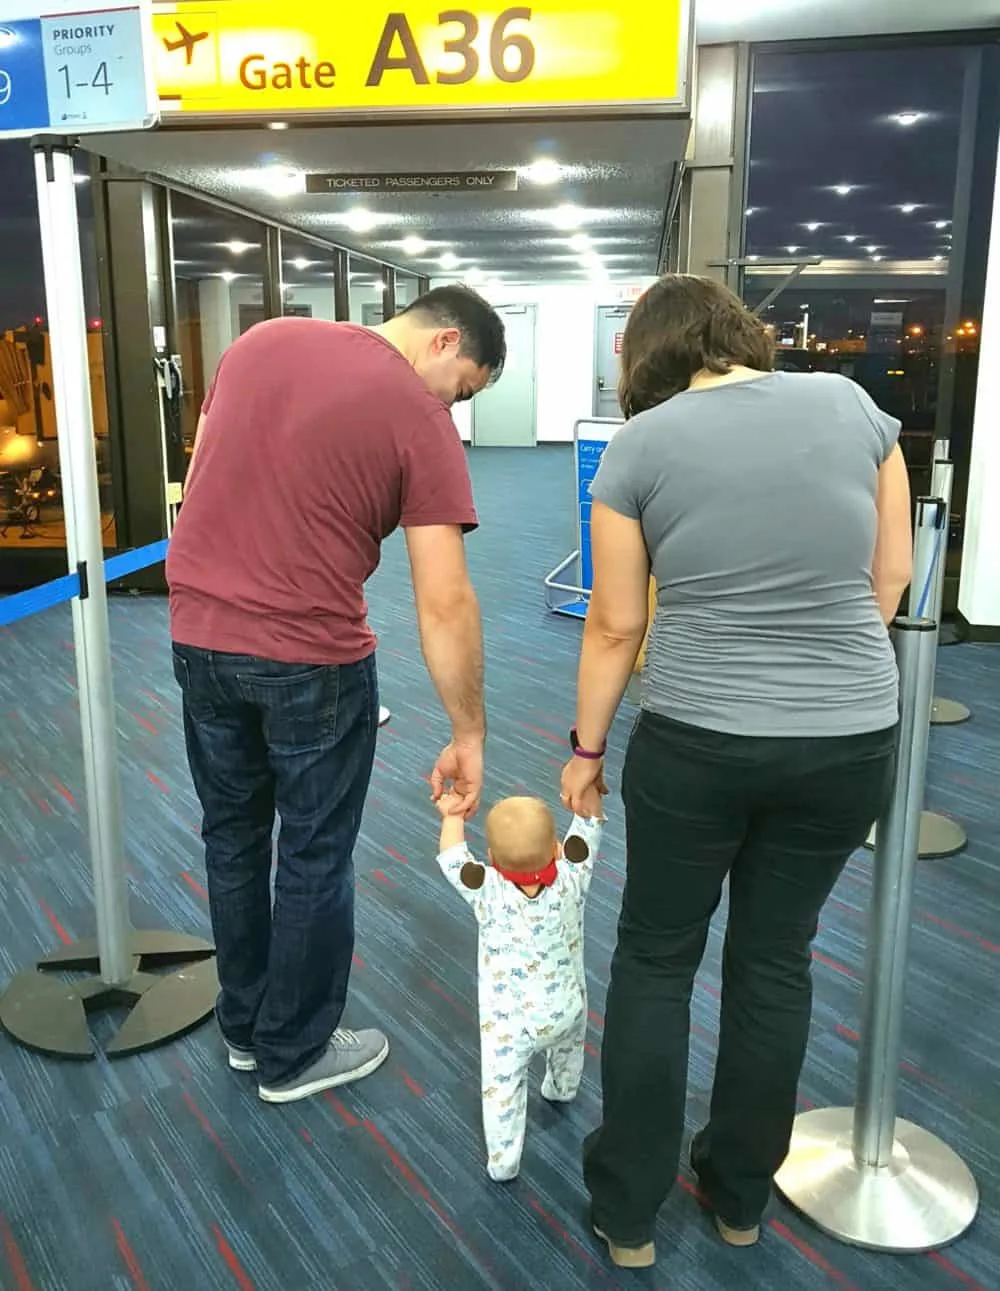 image of toddler in airport